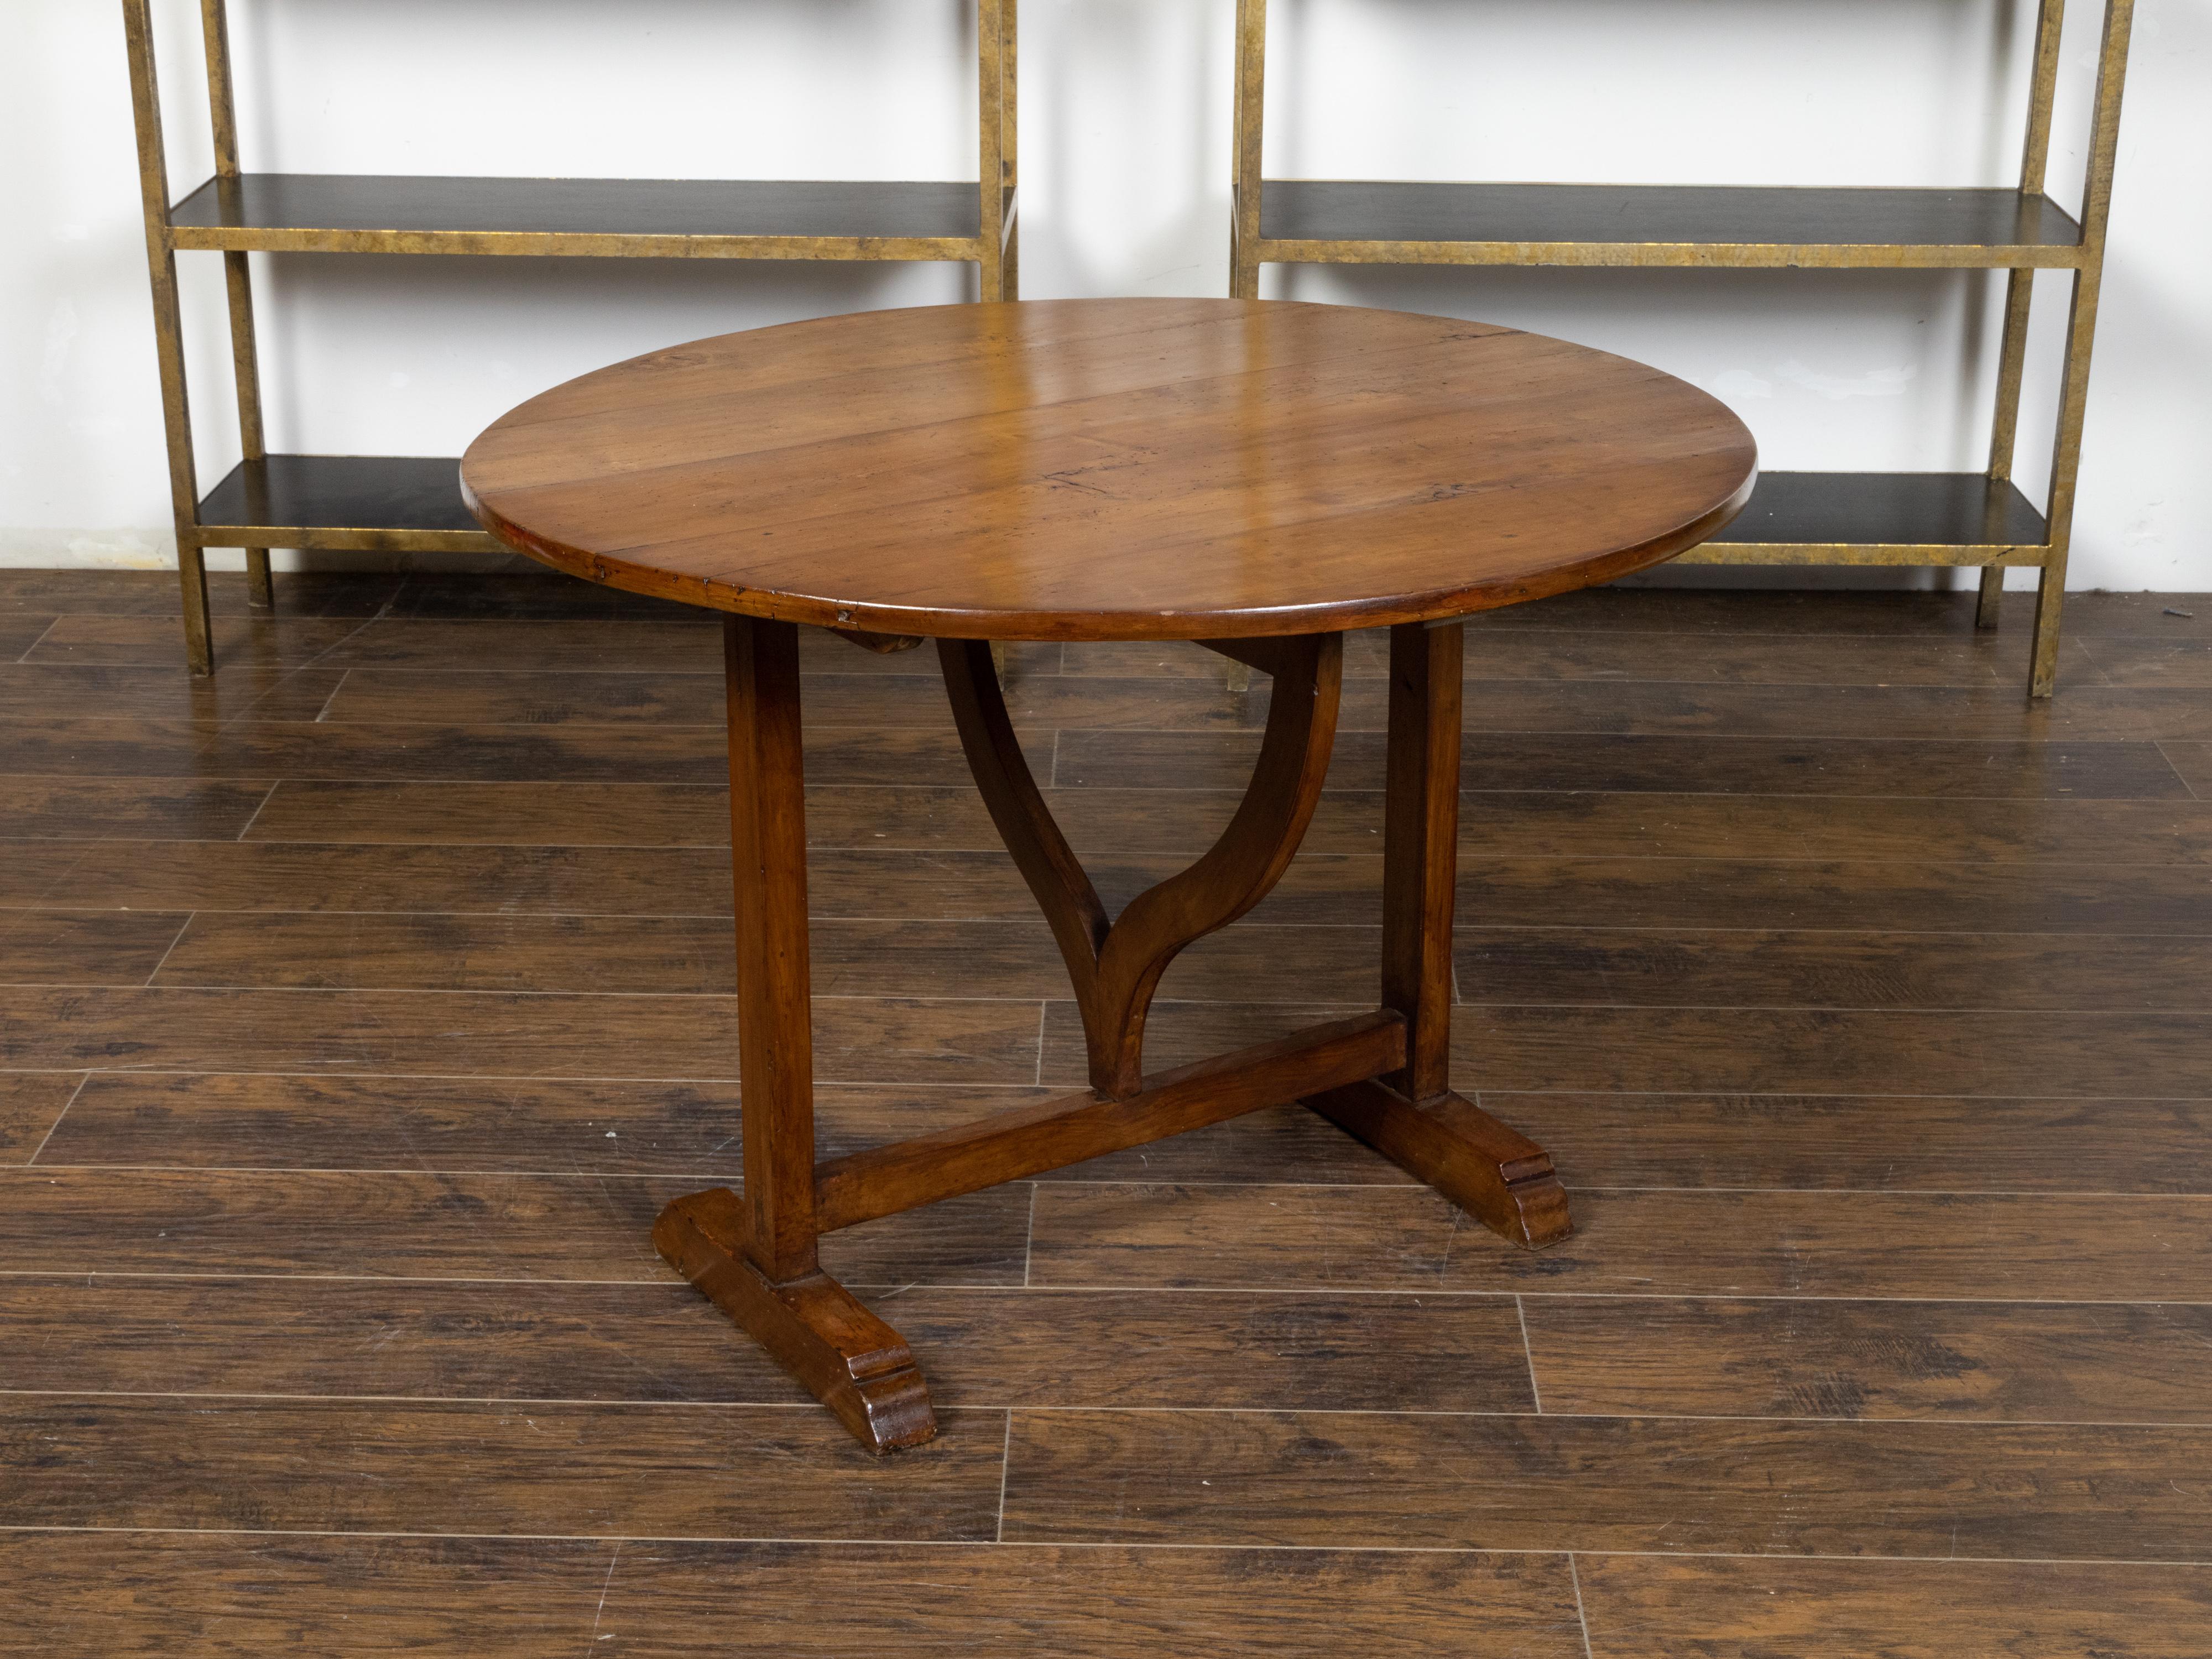 Rustic French 19th Century Walnut Wine Tasting Tilt-Top Table with Circular Top